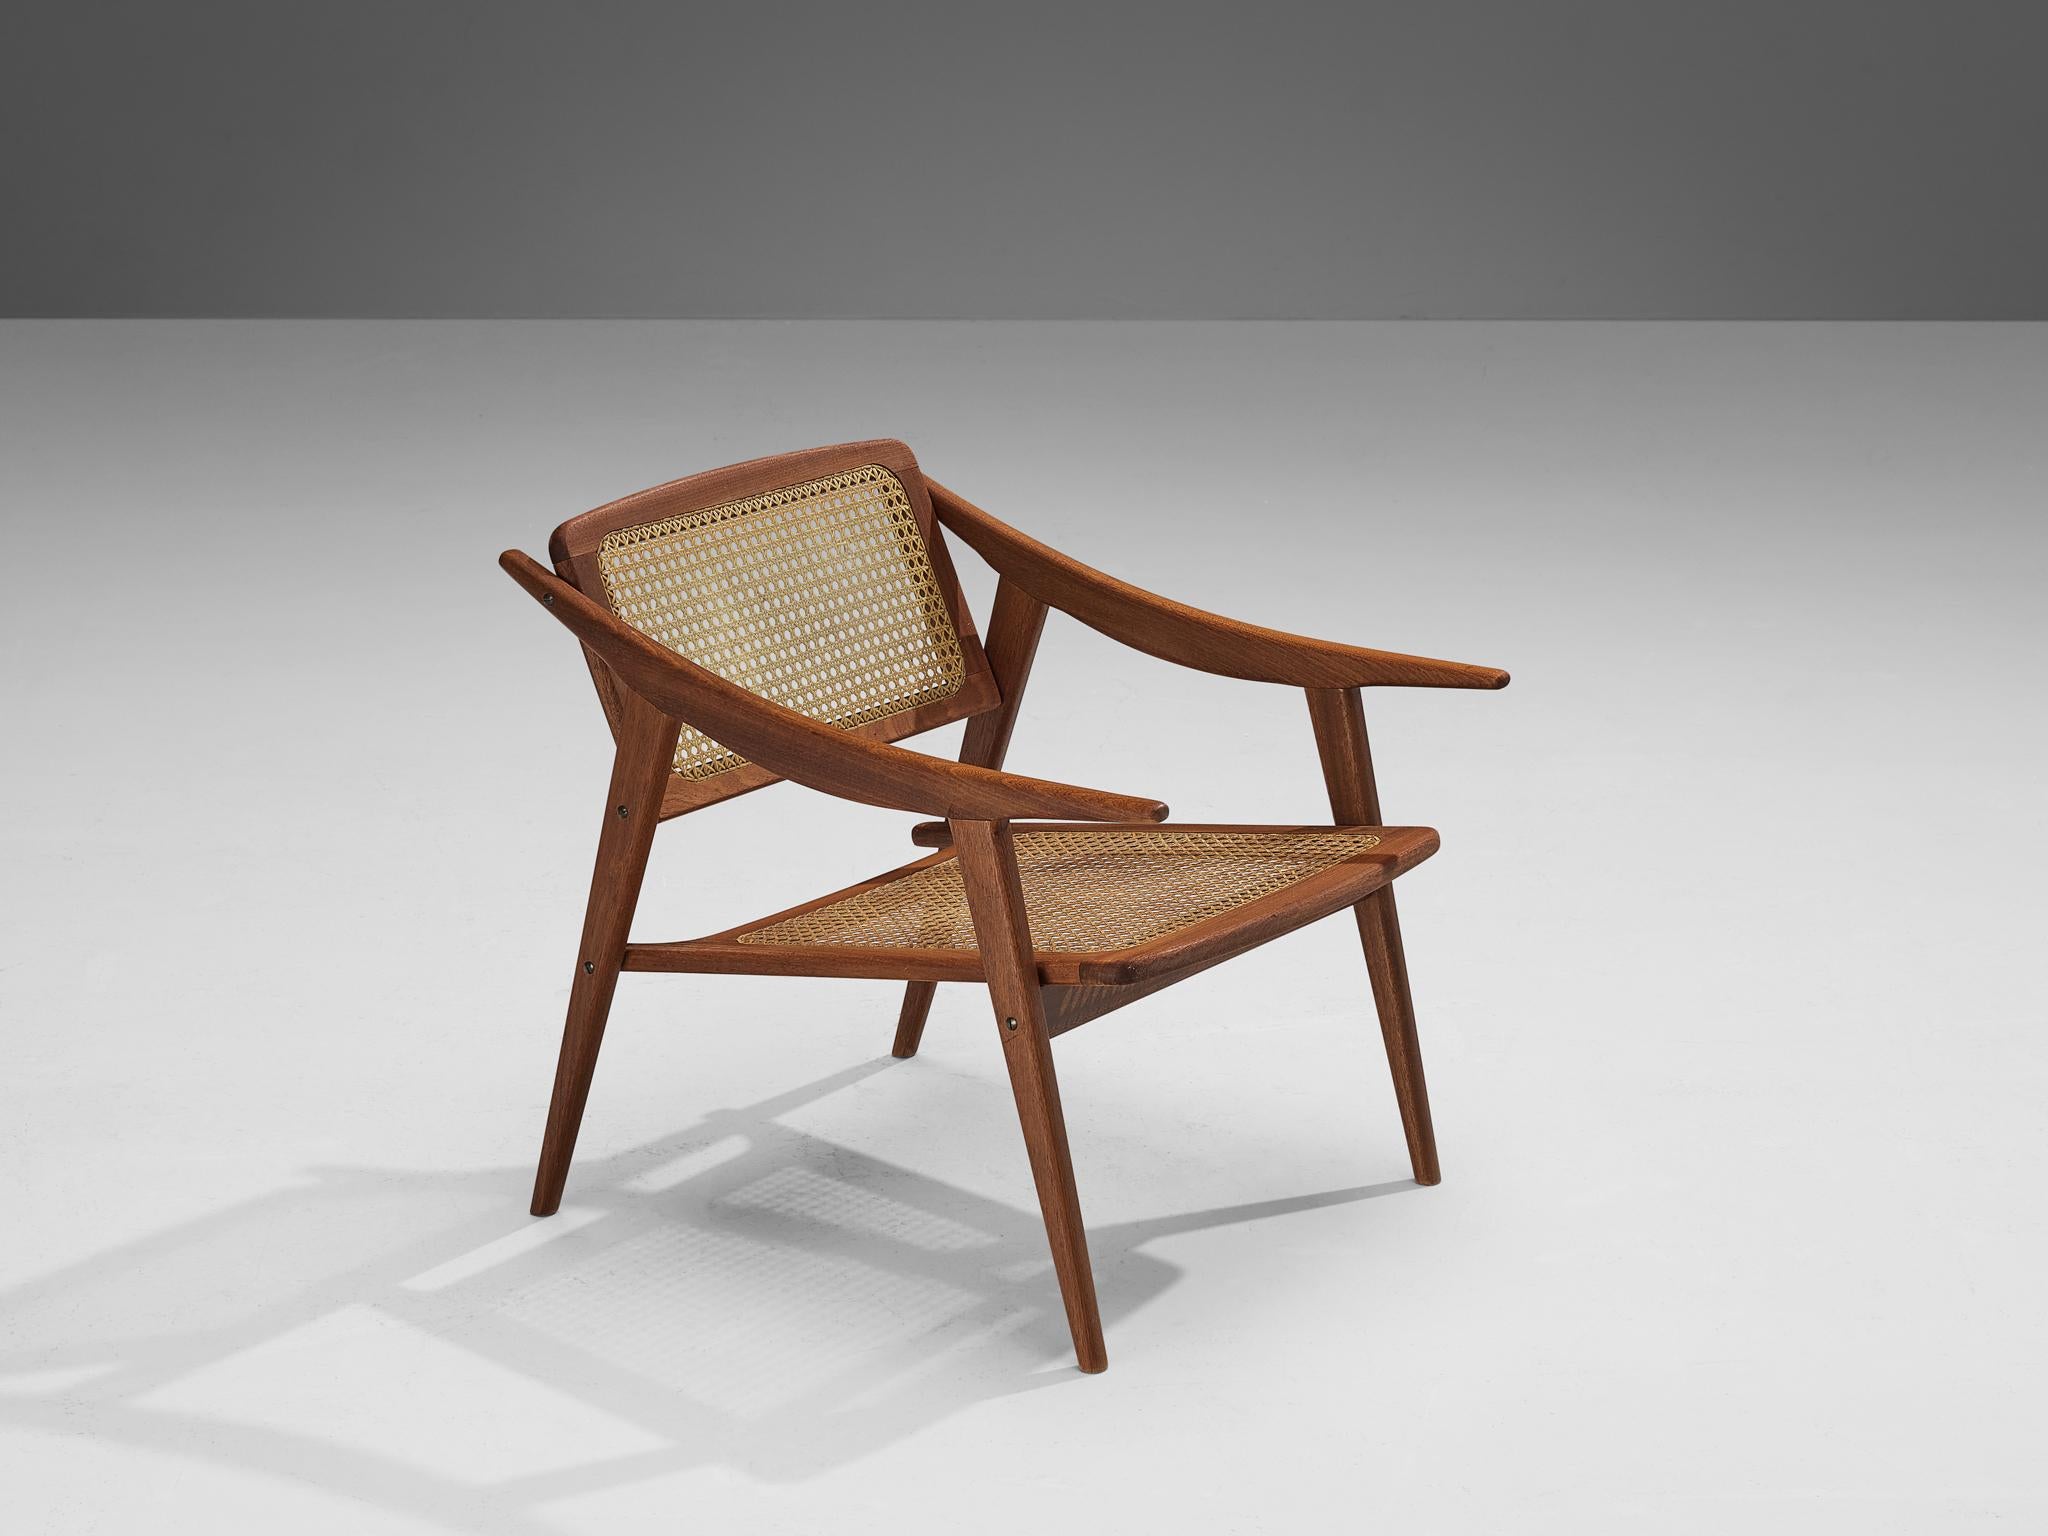 Michel Ducaroy for SNA Roset, armchair, teak, cane, France, 1950s

In the 1950s, the French designer Michel Ducaroy designed this elegant lounge chair as part of his collection for his own furniture company, SNA Roset. This design is a testament to